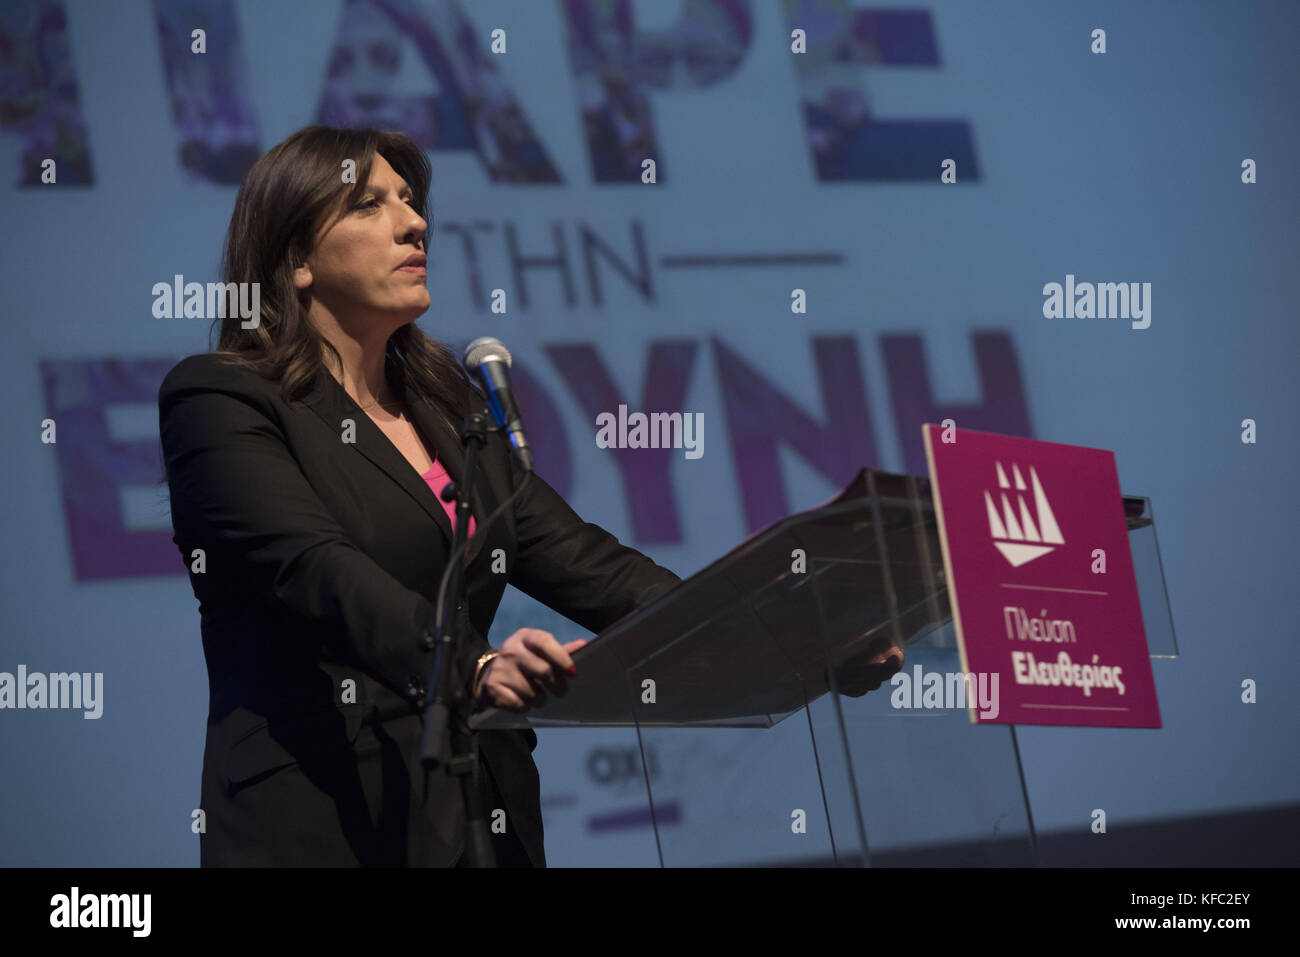 Athens, Greece. 27th Oct, 2017. ZOE KONSTANTOPOULOU addresses participants during the opening of her party's, Plefsi Eleftherias, conference. Plefsi Eleftherias, meaning Sail of Freedom, was formed by governing party Syriza's dissident and former president of the Greek parliament, Zoe Konstantopoulou. Credit: Nikolas Georgiou/ZUMA Wire/Alamy Live News Stock Photo